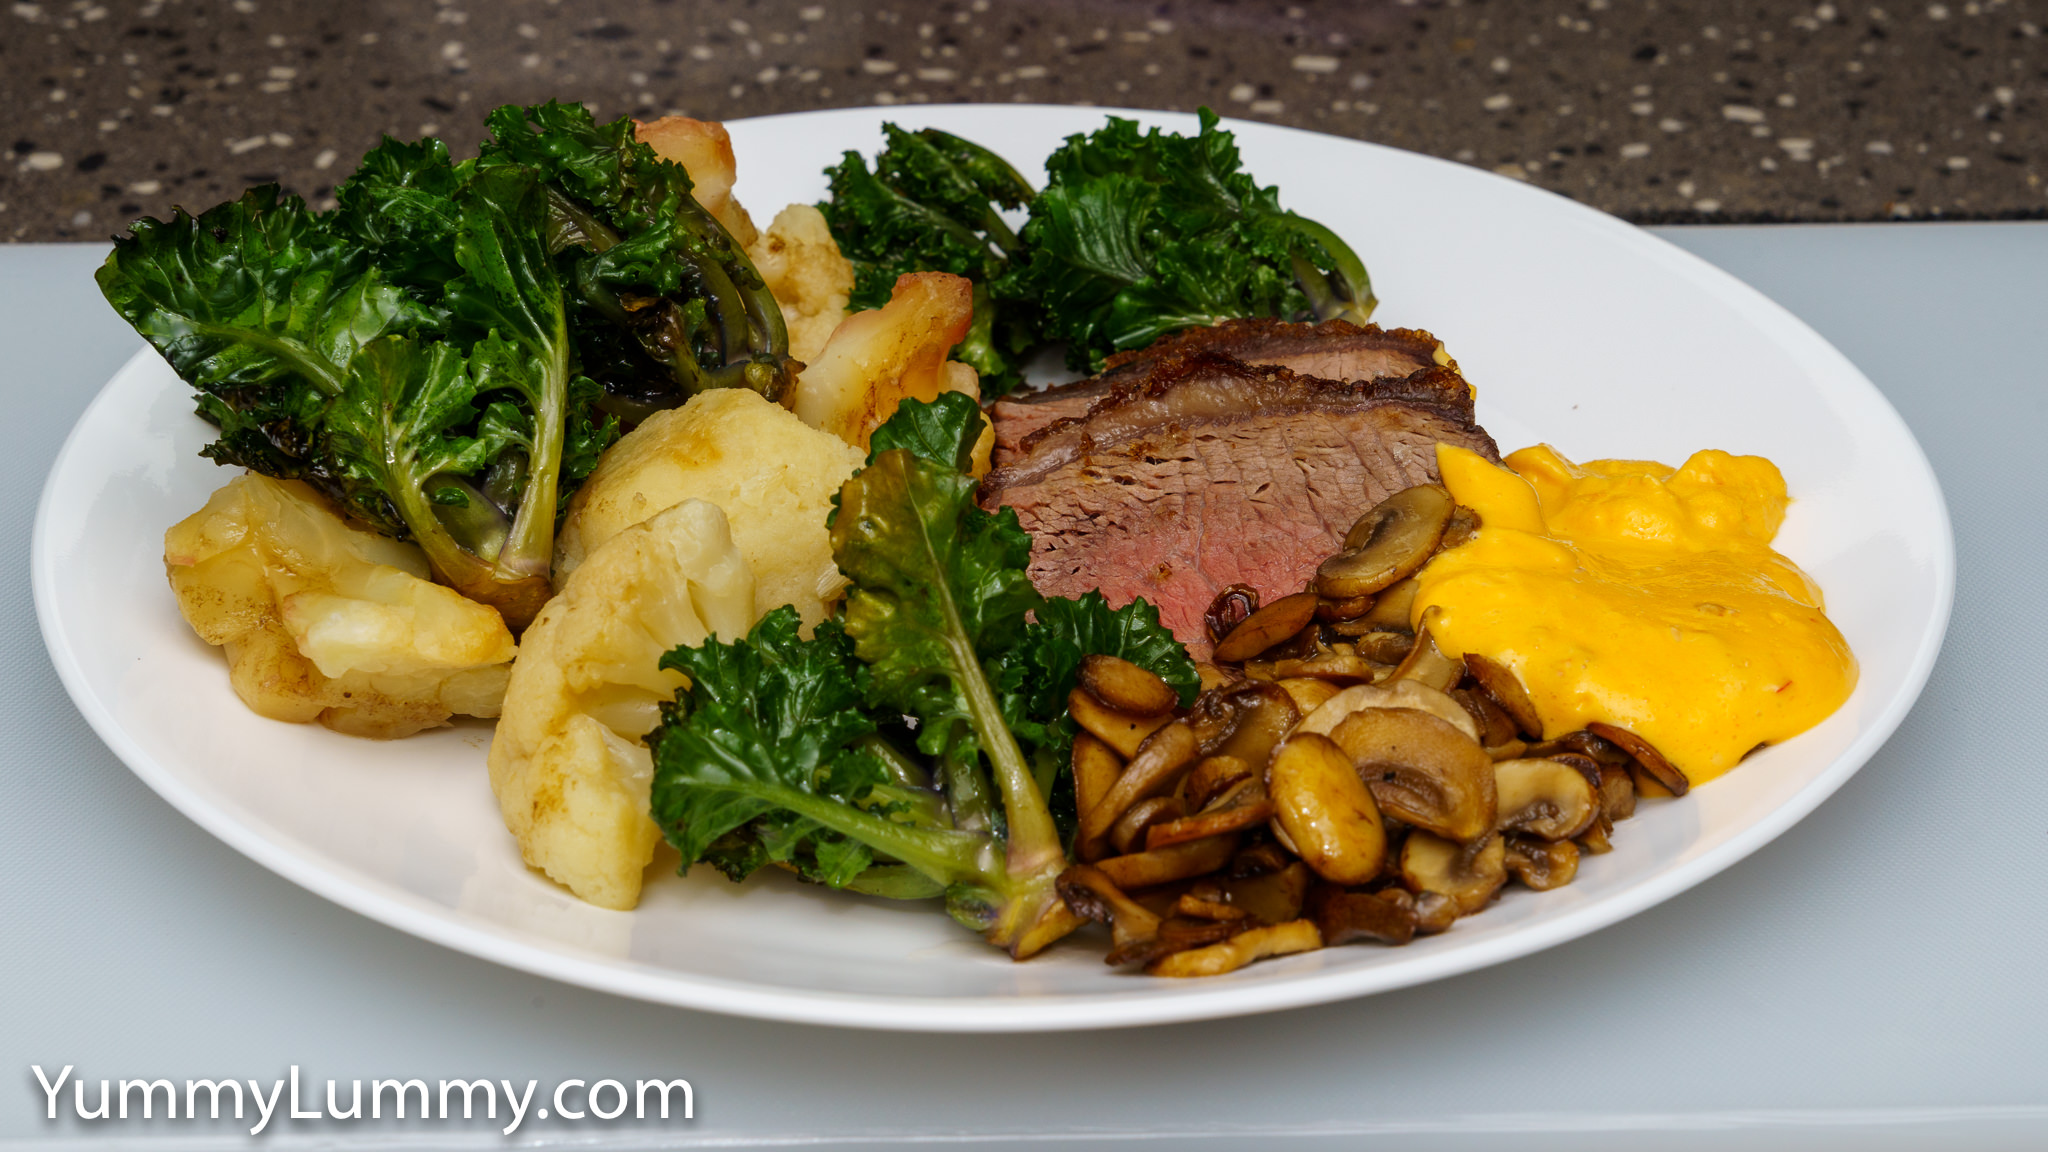 MEATER made rump roast, Hollandaise sauce, and vegetables